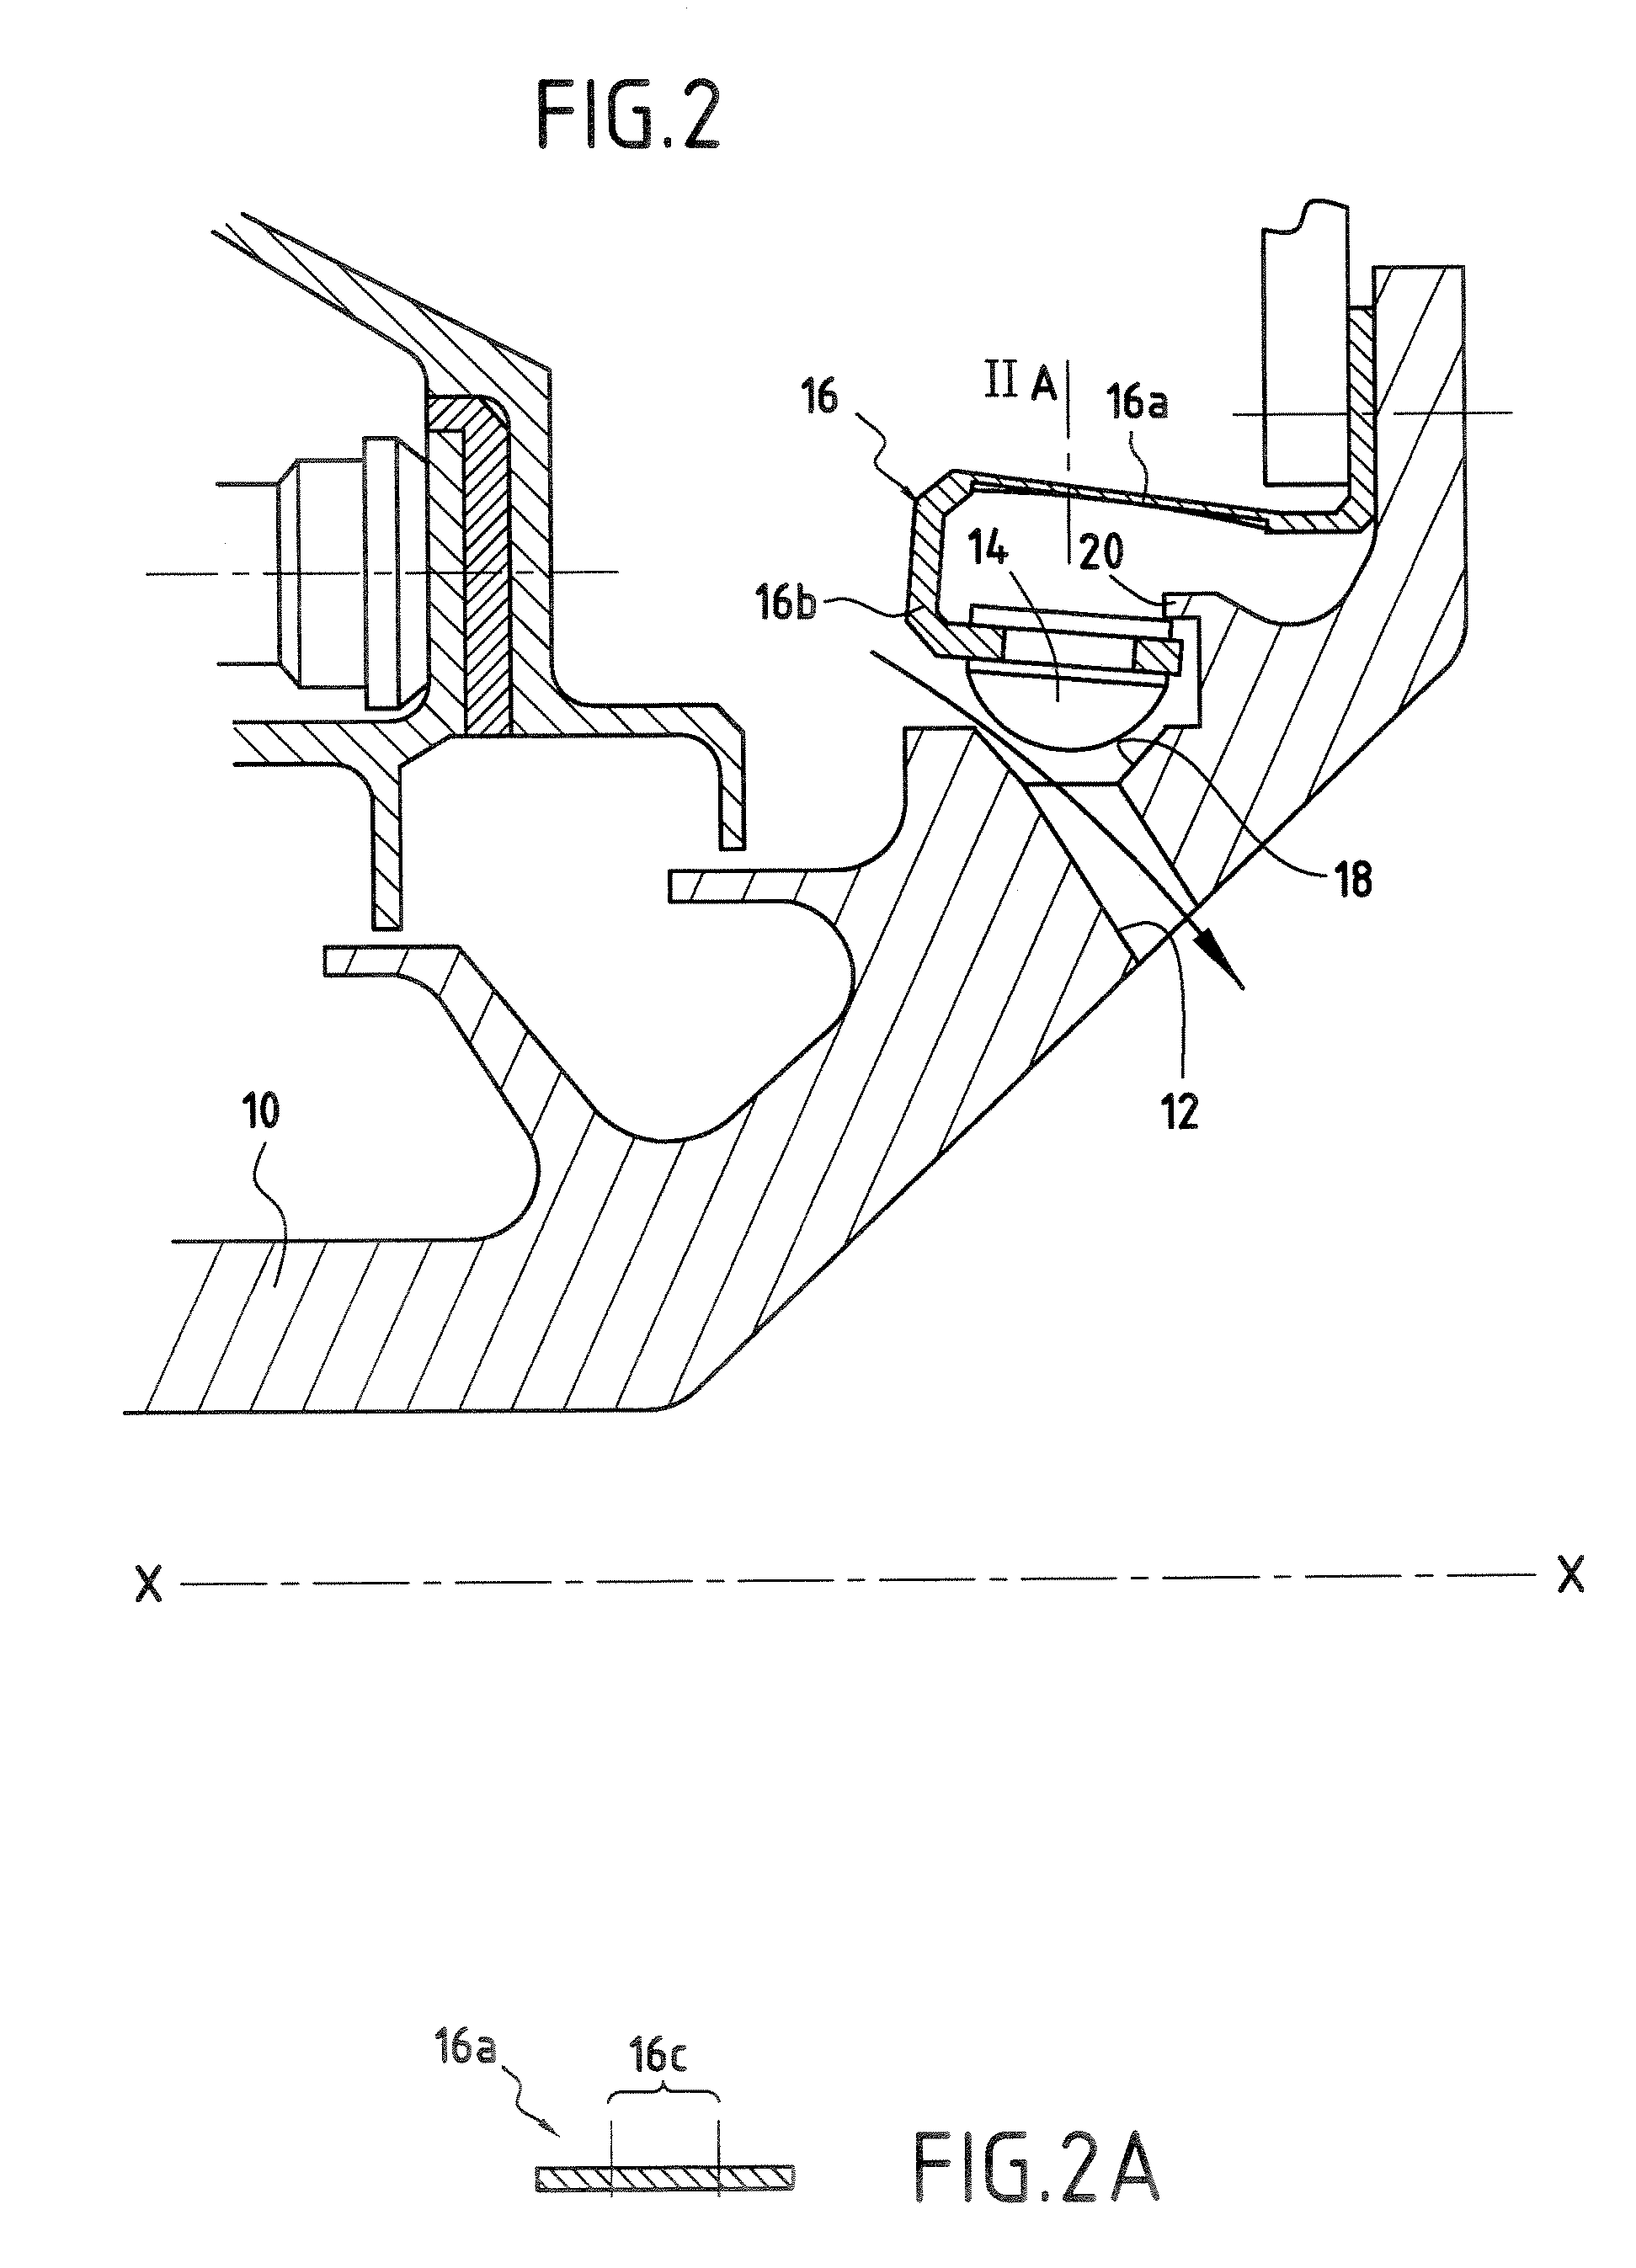 Method of regulating the flow rate of air in a rotary shaft of a turbomachine